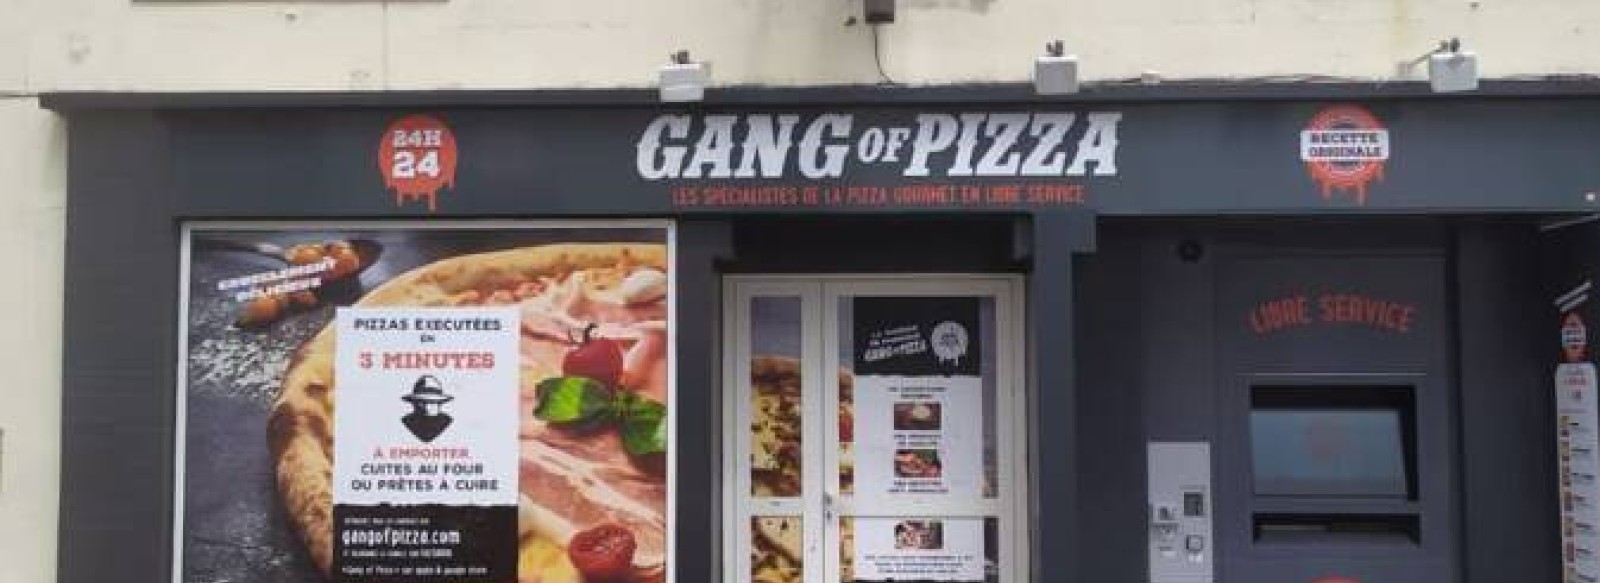 GANG OF PIZZA